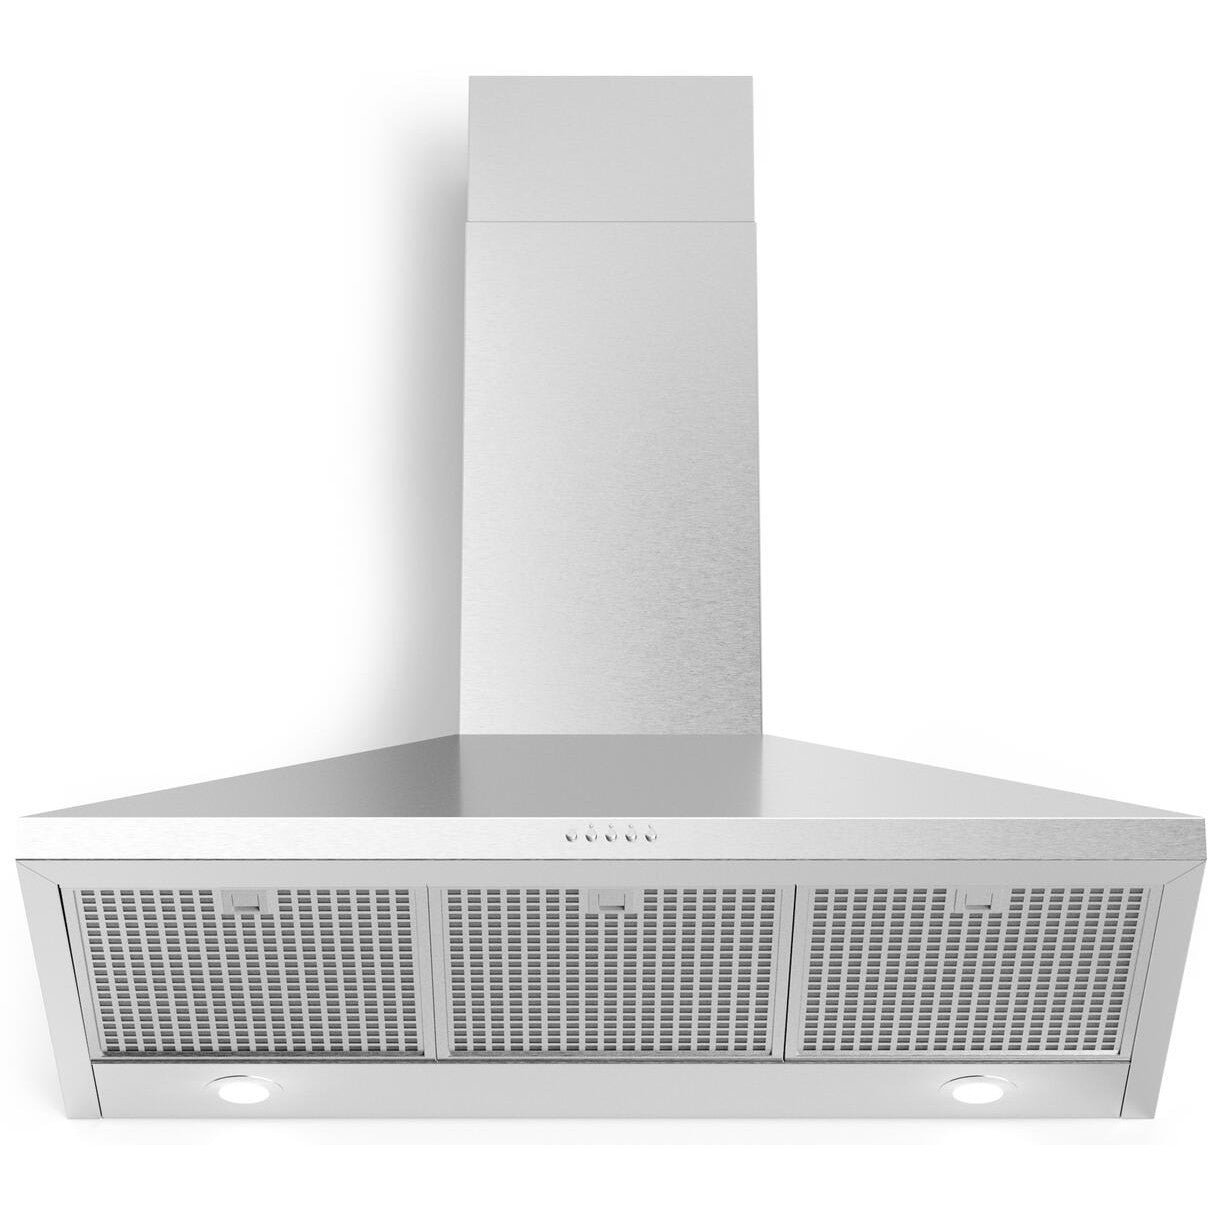 Forte Bravo 30" 600 CFM Convertible Residential Round Duct Stainless Steel Wall Mount Range Hood With Chimney Extension, Recirculating Kit, Charcoal Filters, and LED Lighting